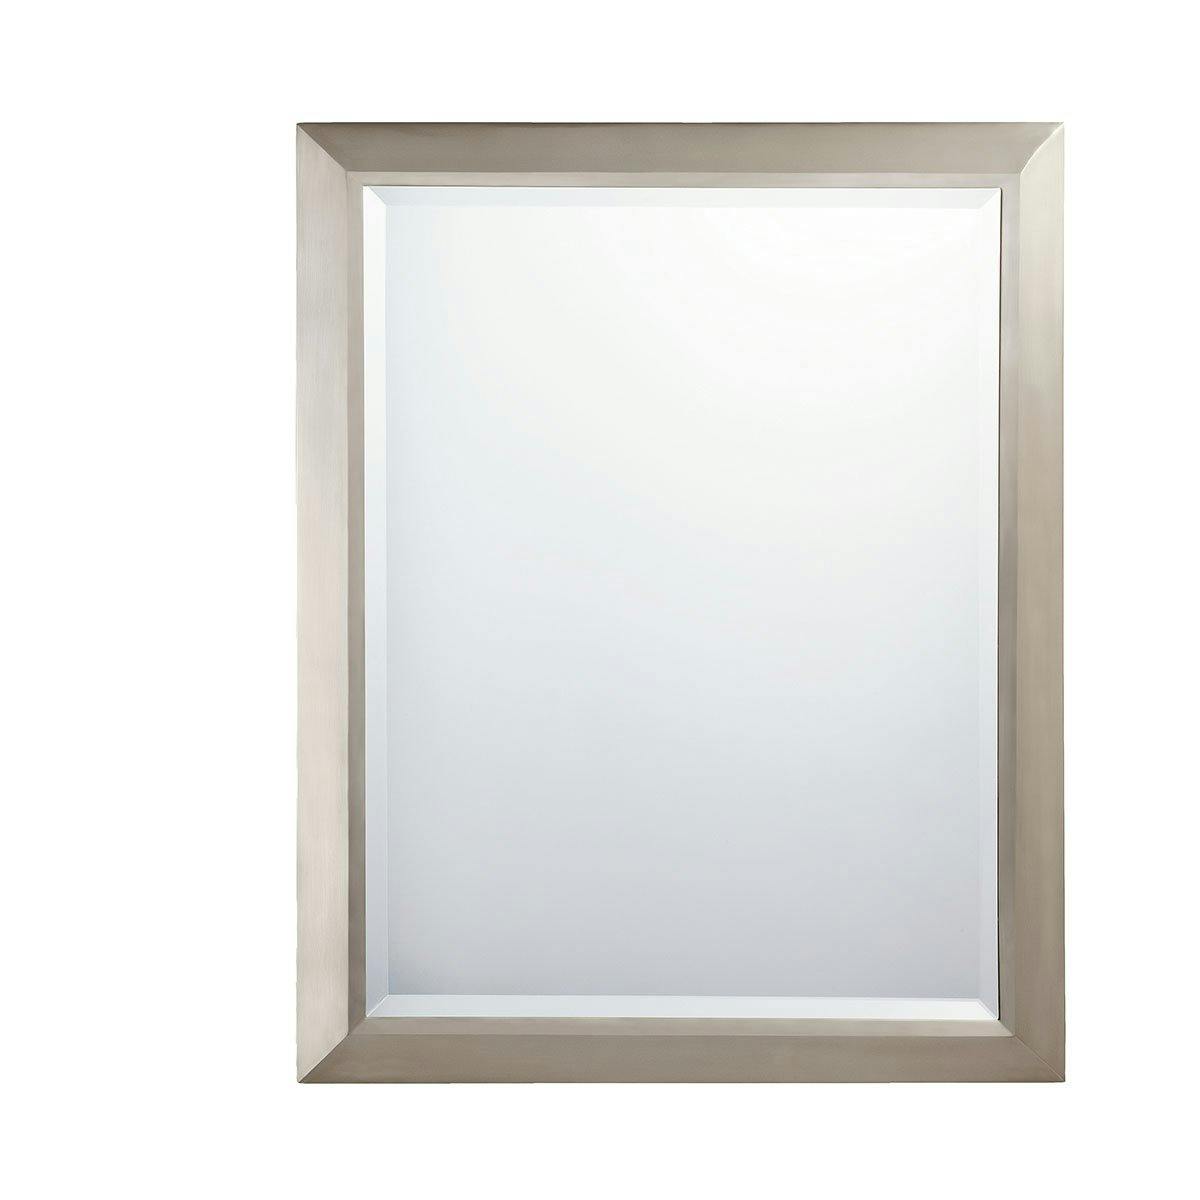 Classic Rectangular Mirror Brushed Nickel on a white background